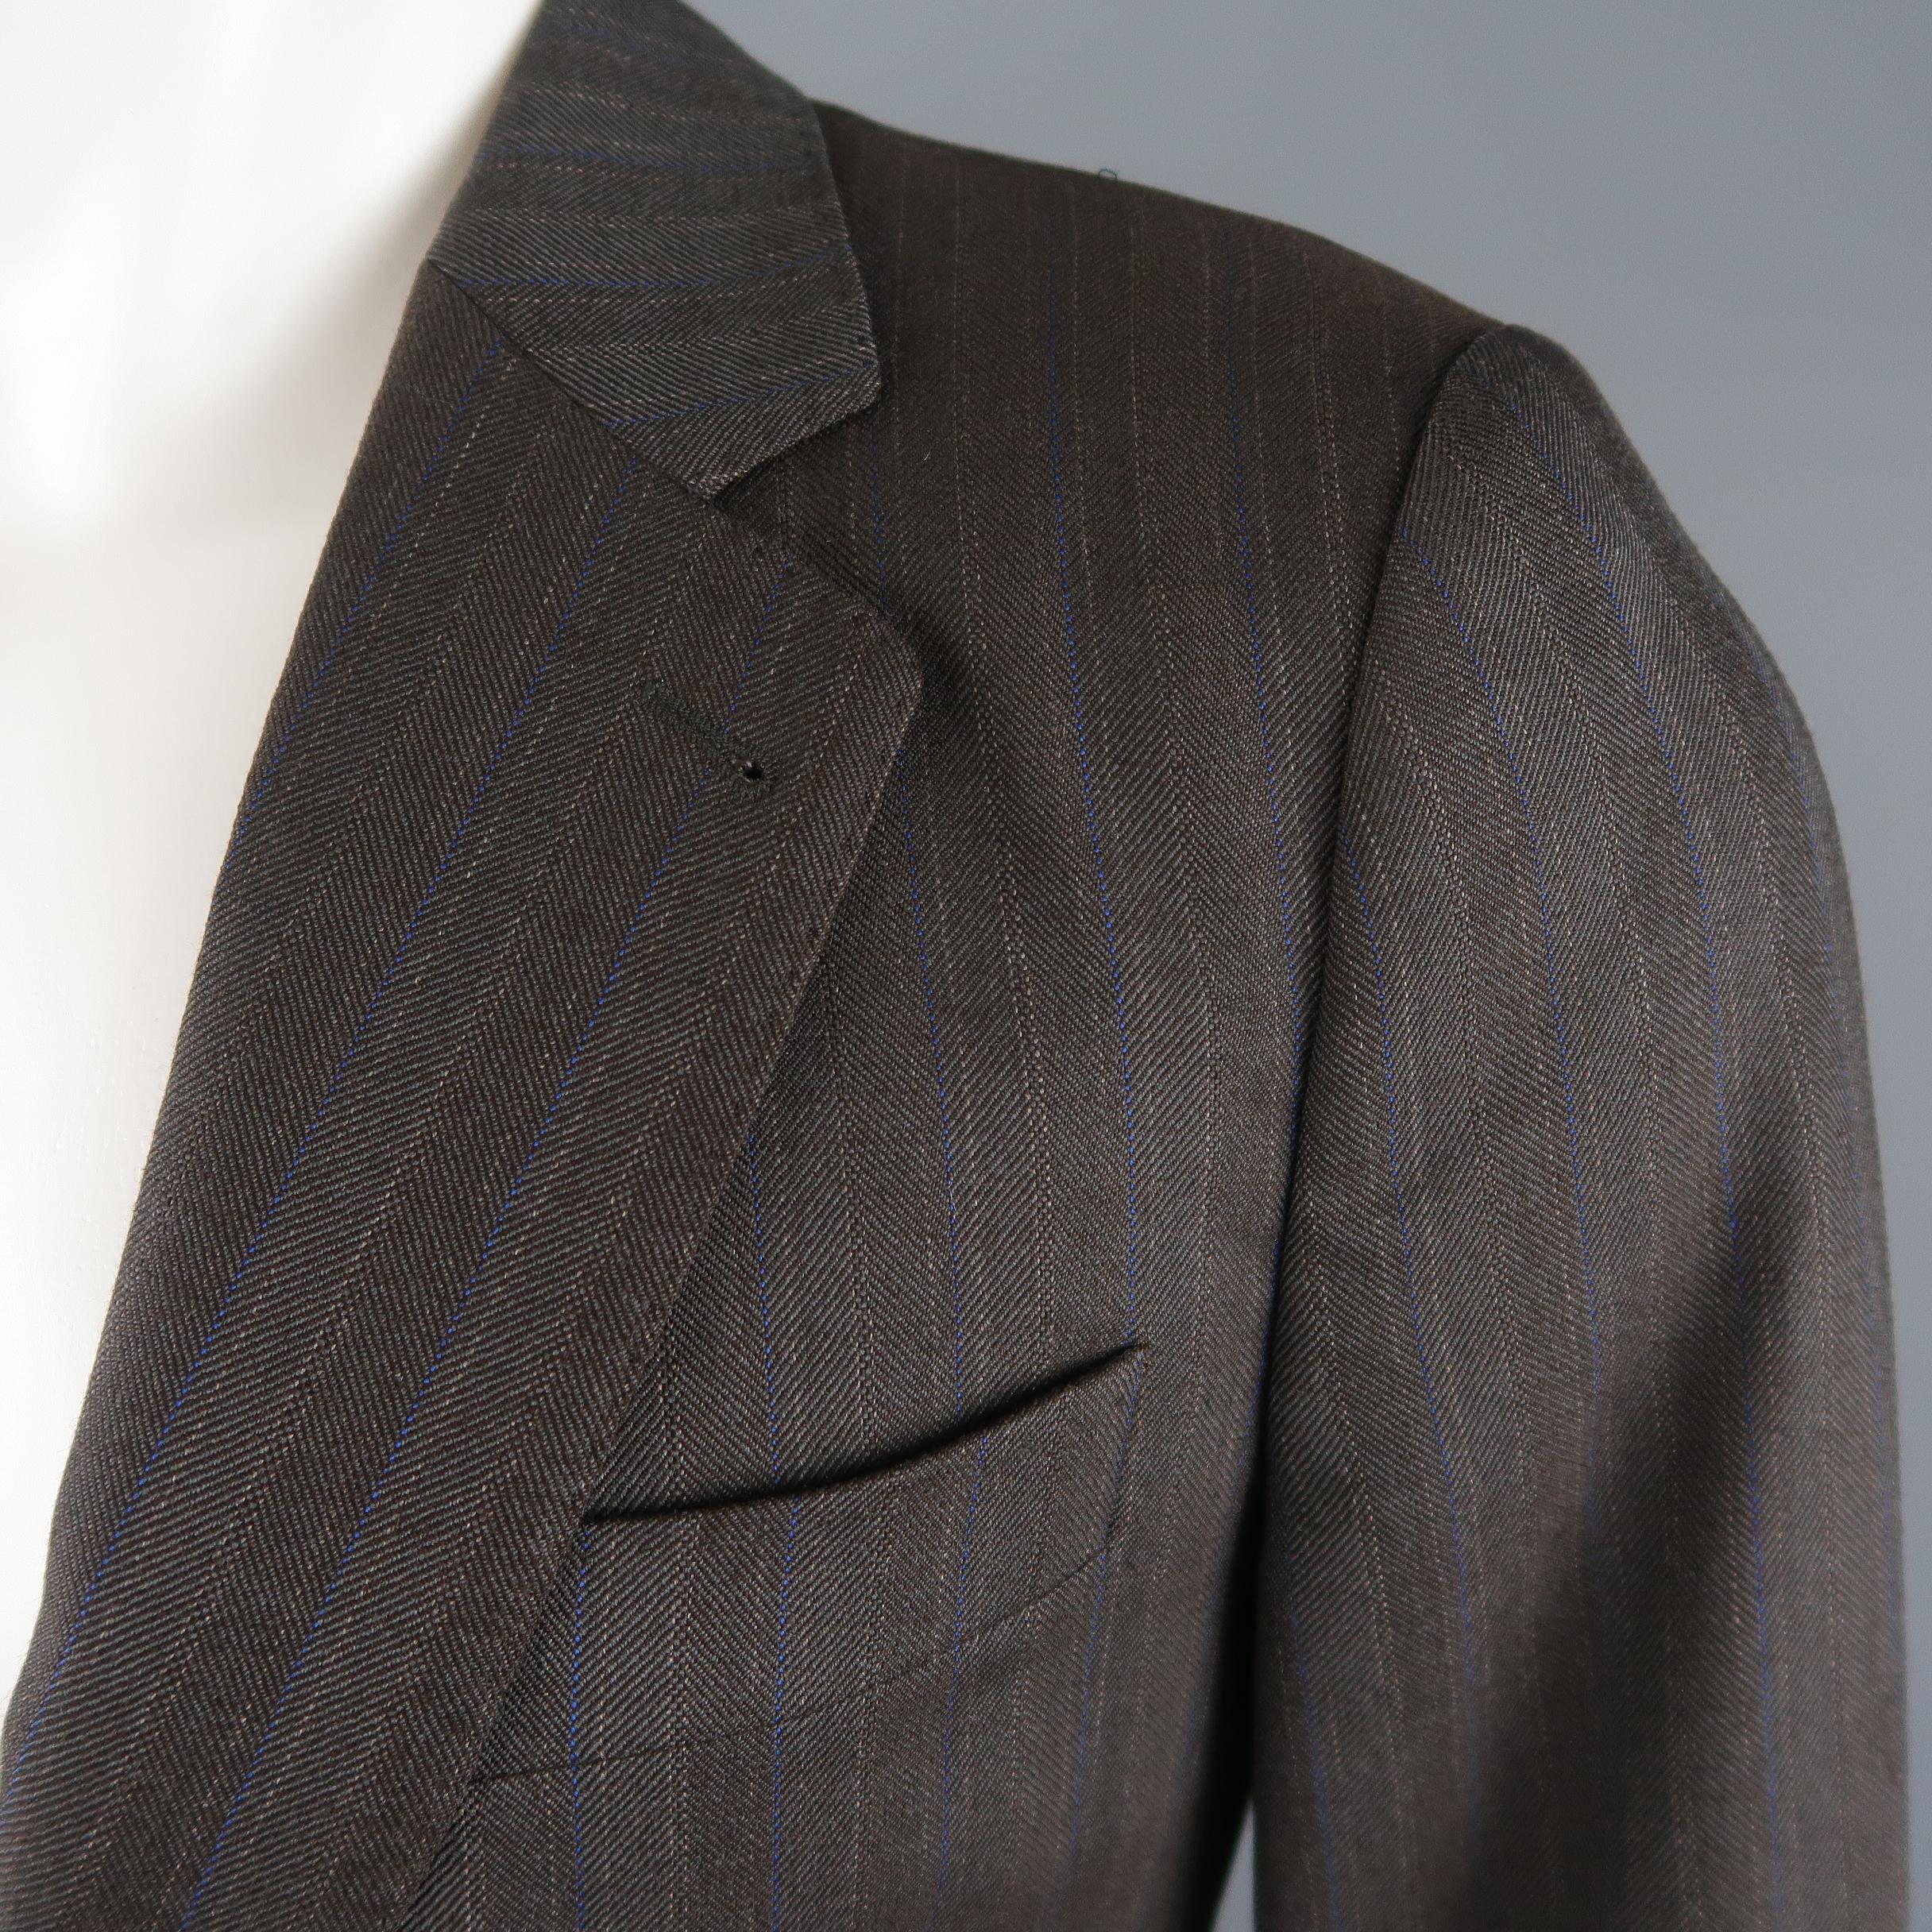 DRIES VAN NOTEN sport coat comes in brown and blue striped wool blend twill with a single breasted, two button closure, top stitching, and functional button cuffs. Made in Morocco.
 
Excellent Pre-Owned Condition.
Marked: IT 46
 
Measurements:
